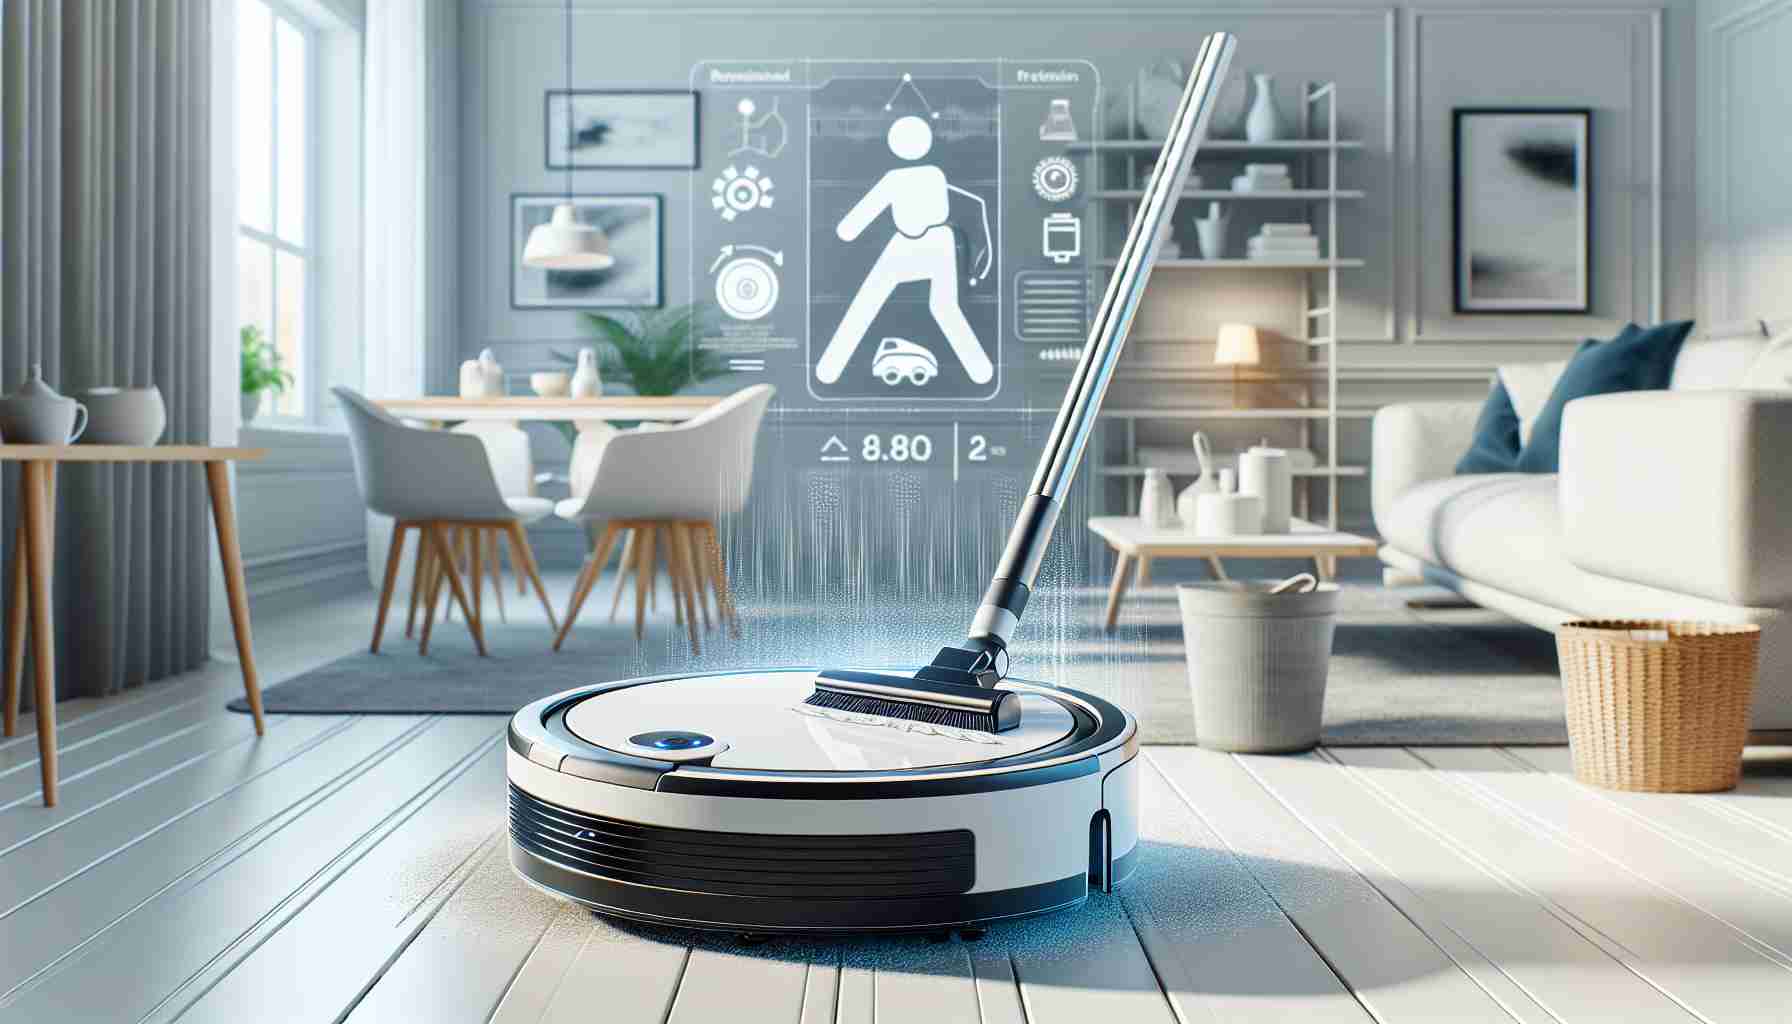 Revolutionize Home Cleaning with a Major Discount on the Shark Matrix Robot Vacuum